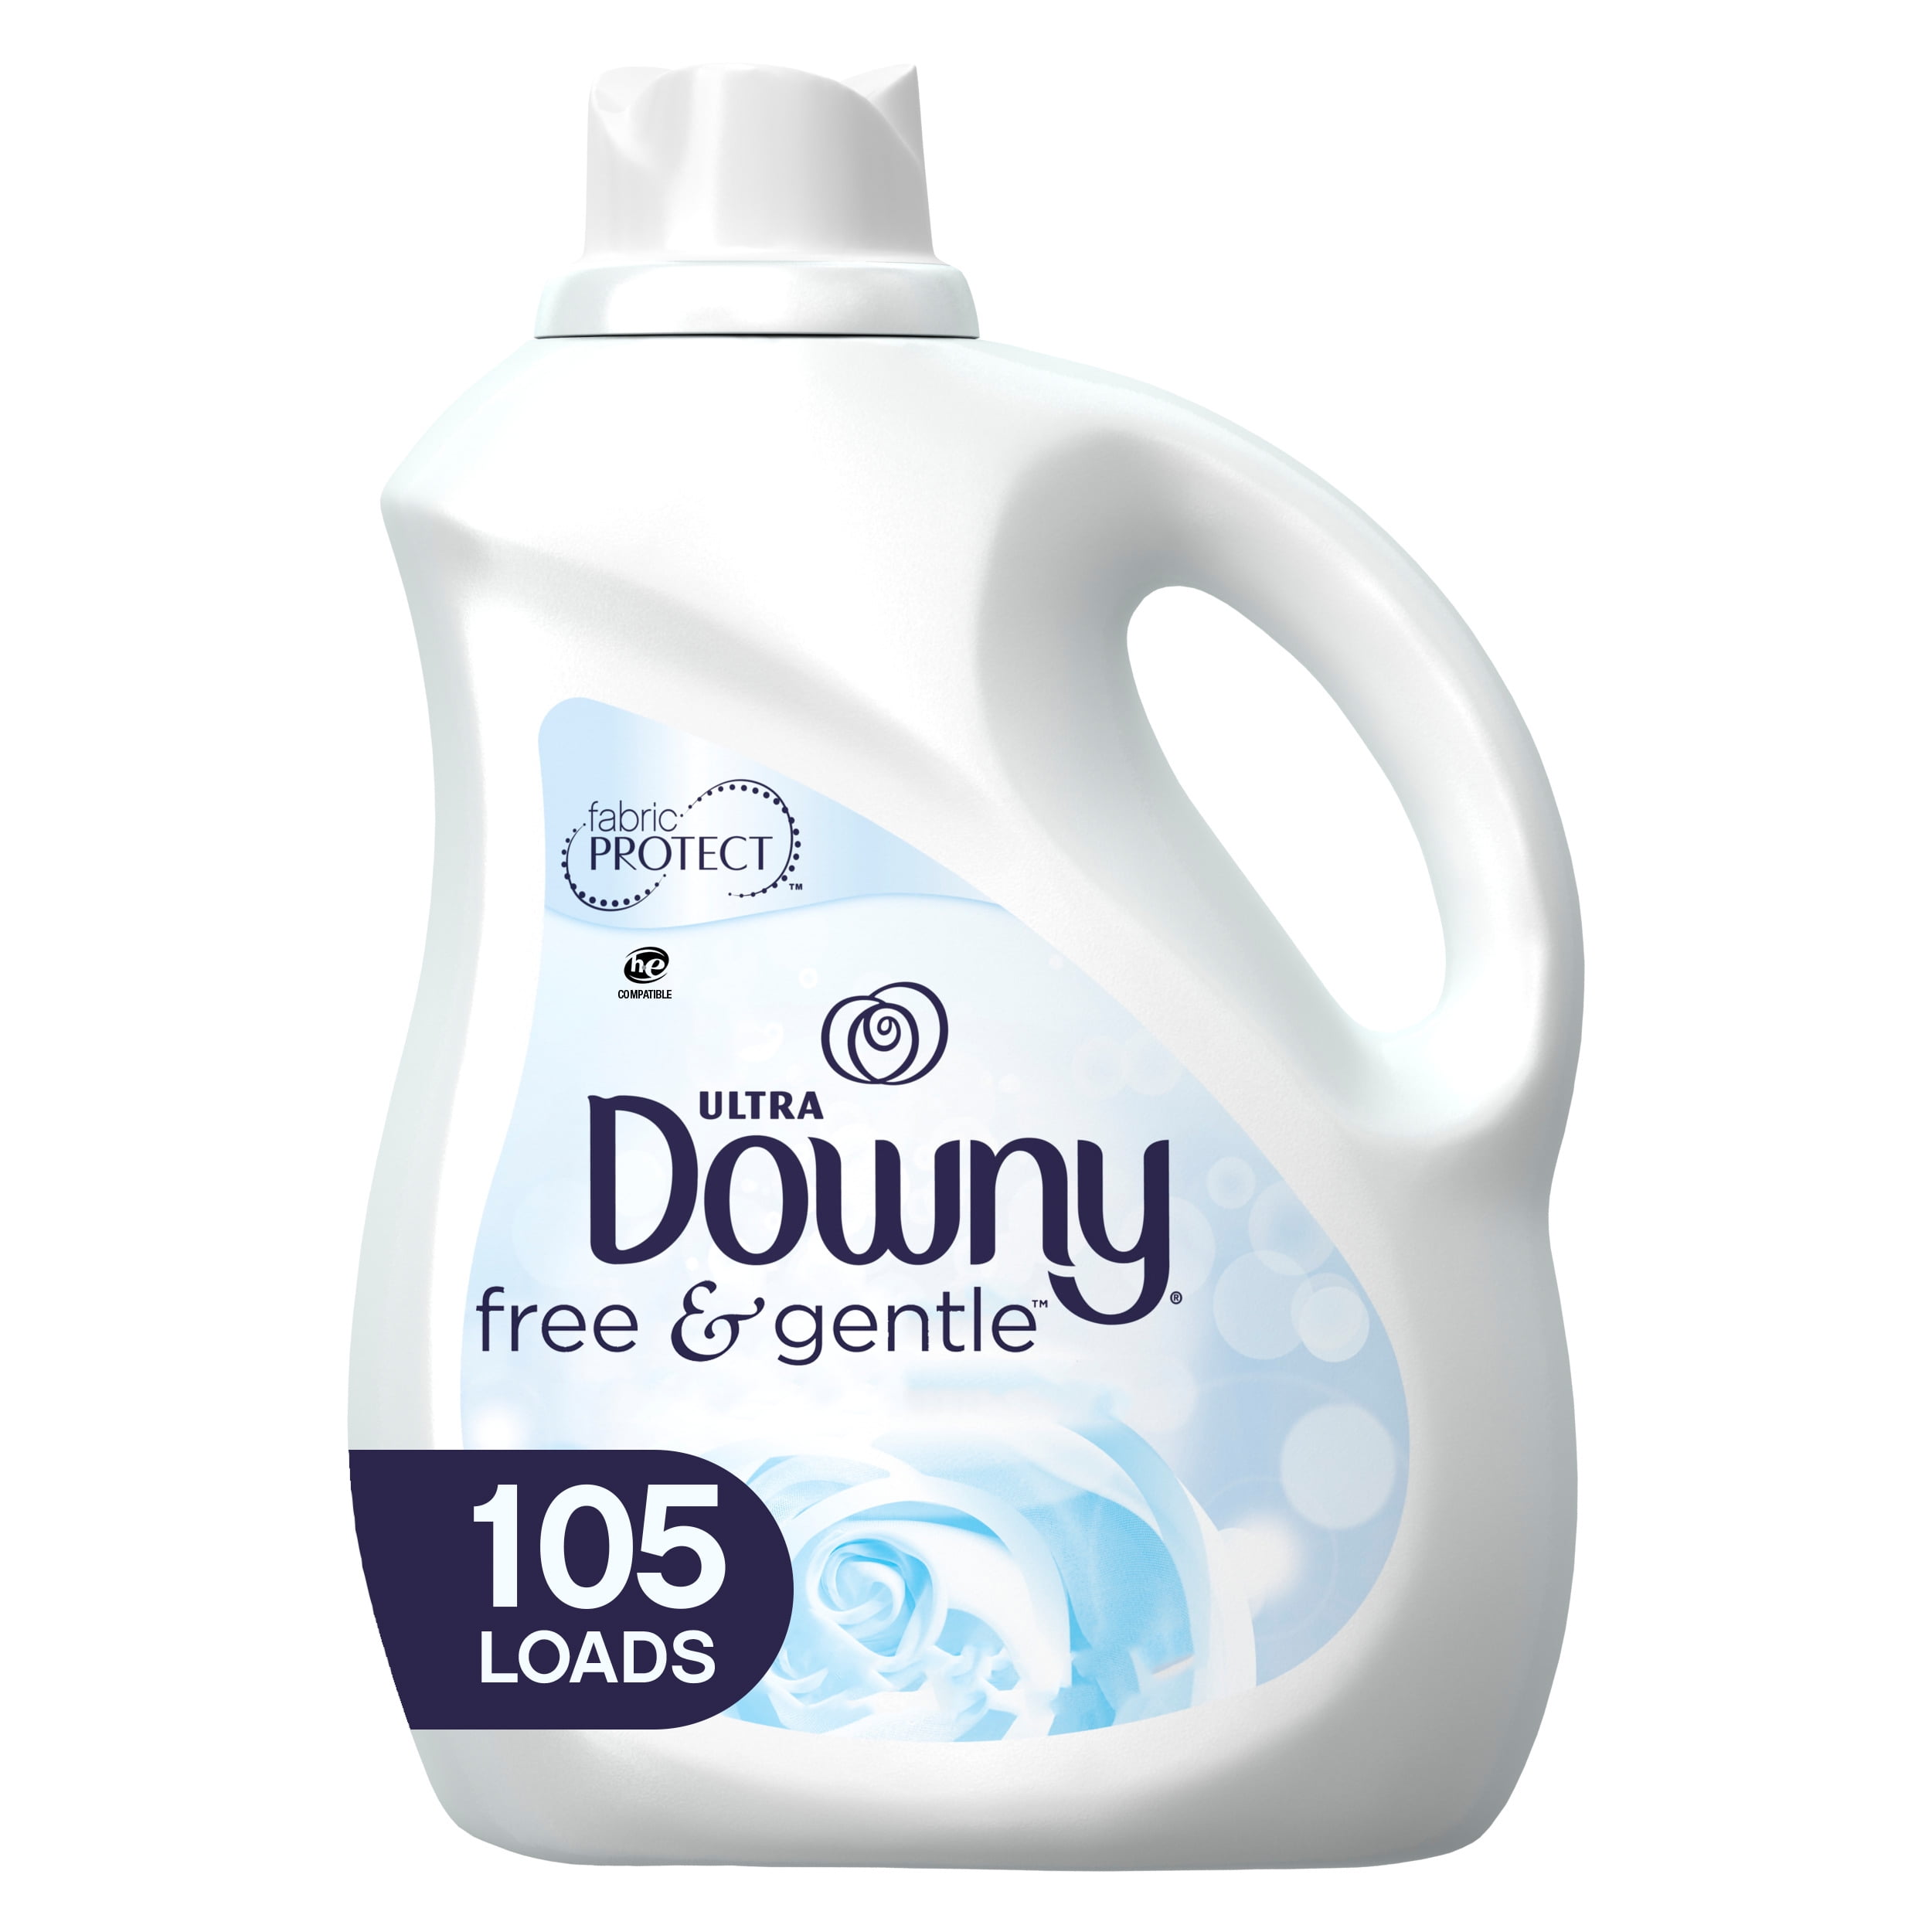 Fabric Softener For Sensitive Skin That Smells Good Attitude By Bio Spectra Laundry Detergent